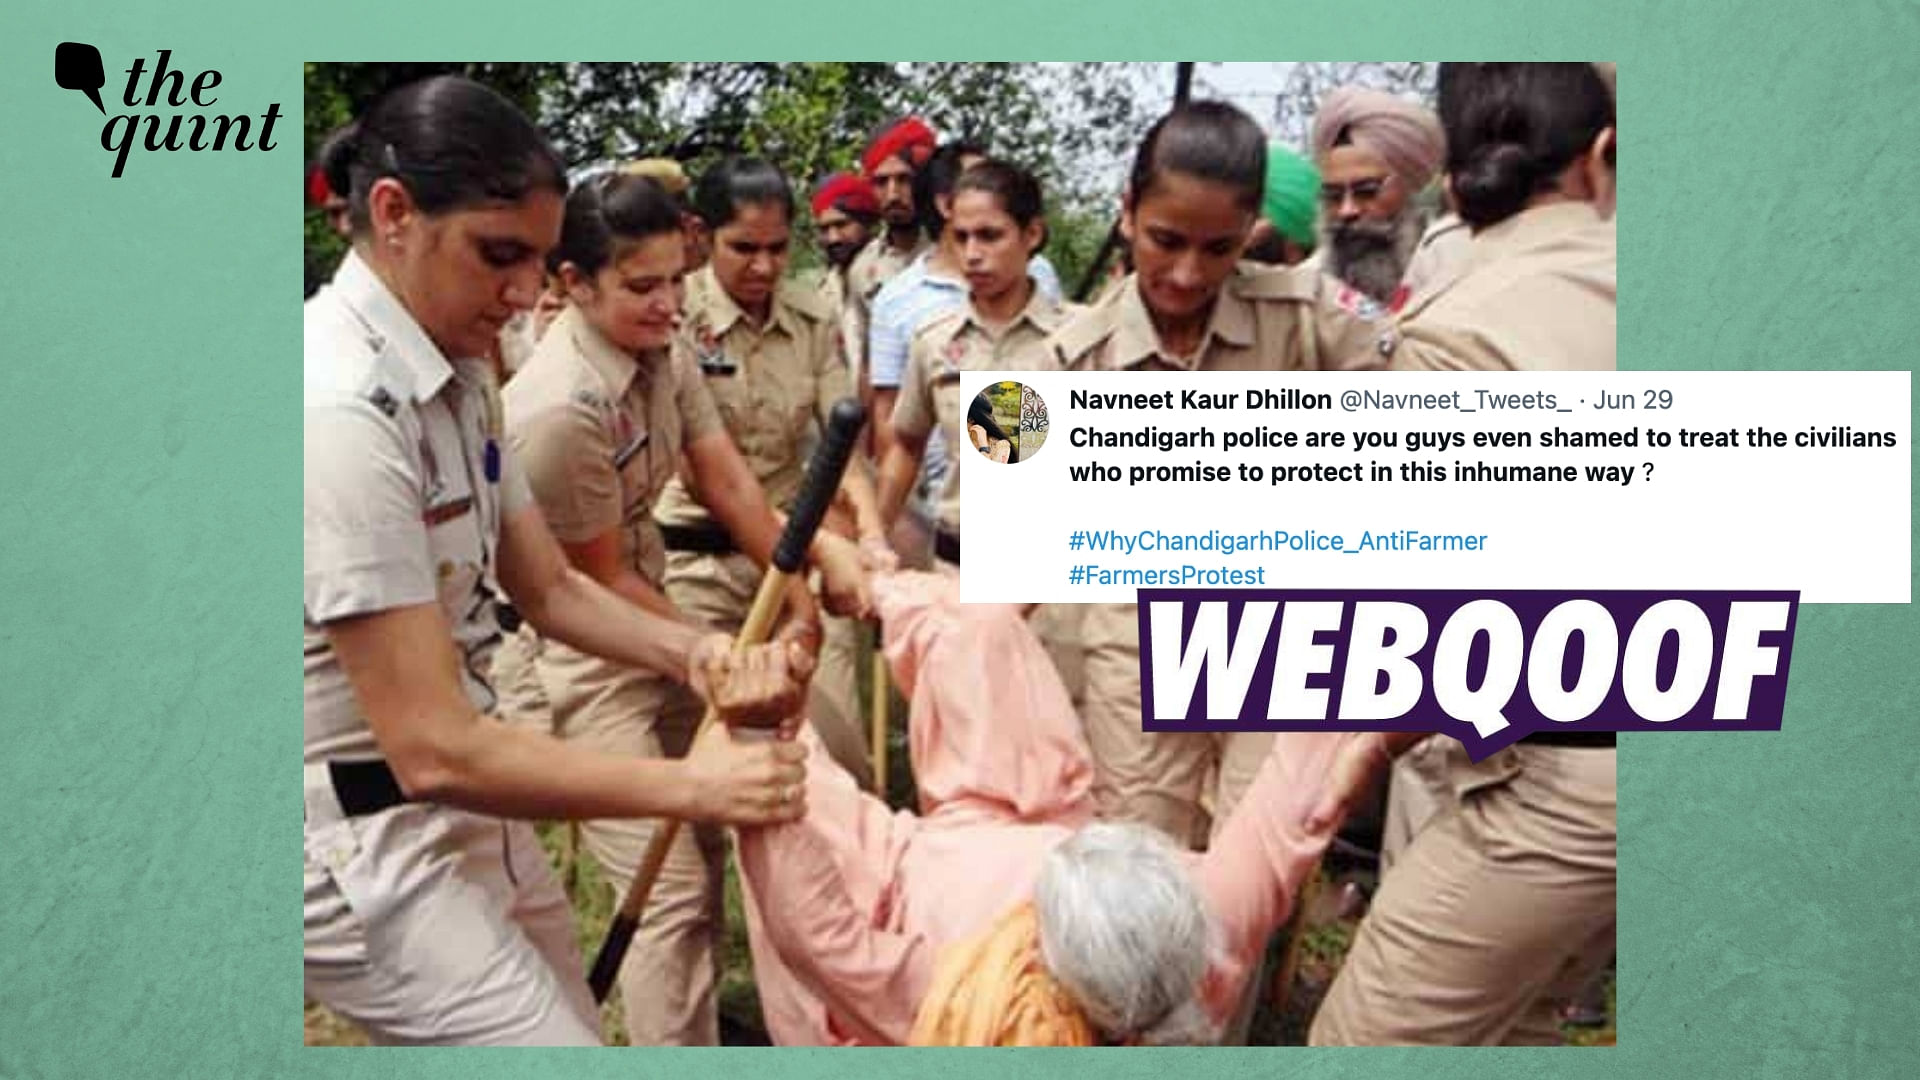 <div class="paragraphs"><p>The viral image claims Chandigarh police dragged the woman and links it to farmers' protest.&nbsp;</p></div>